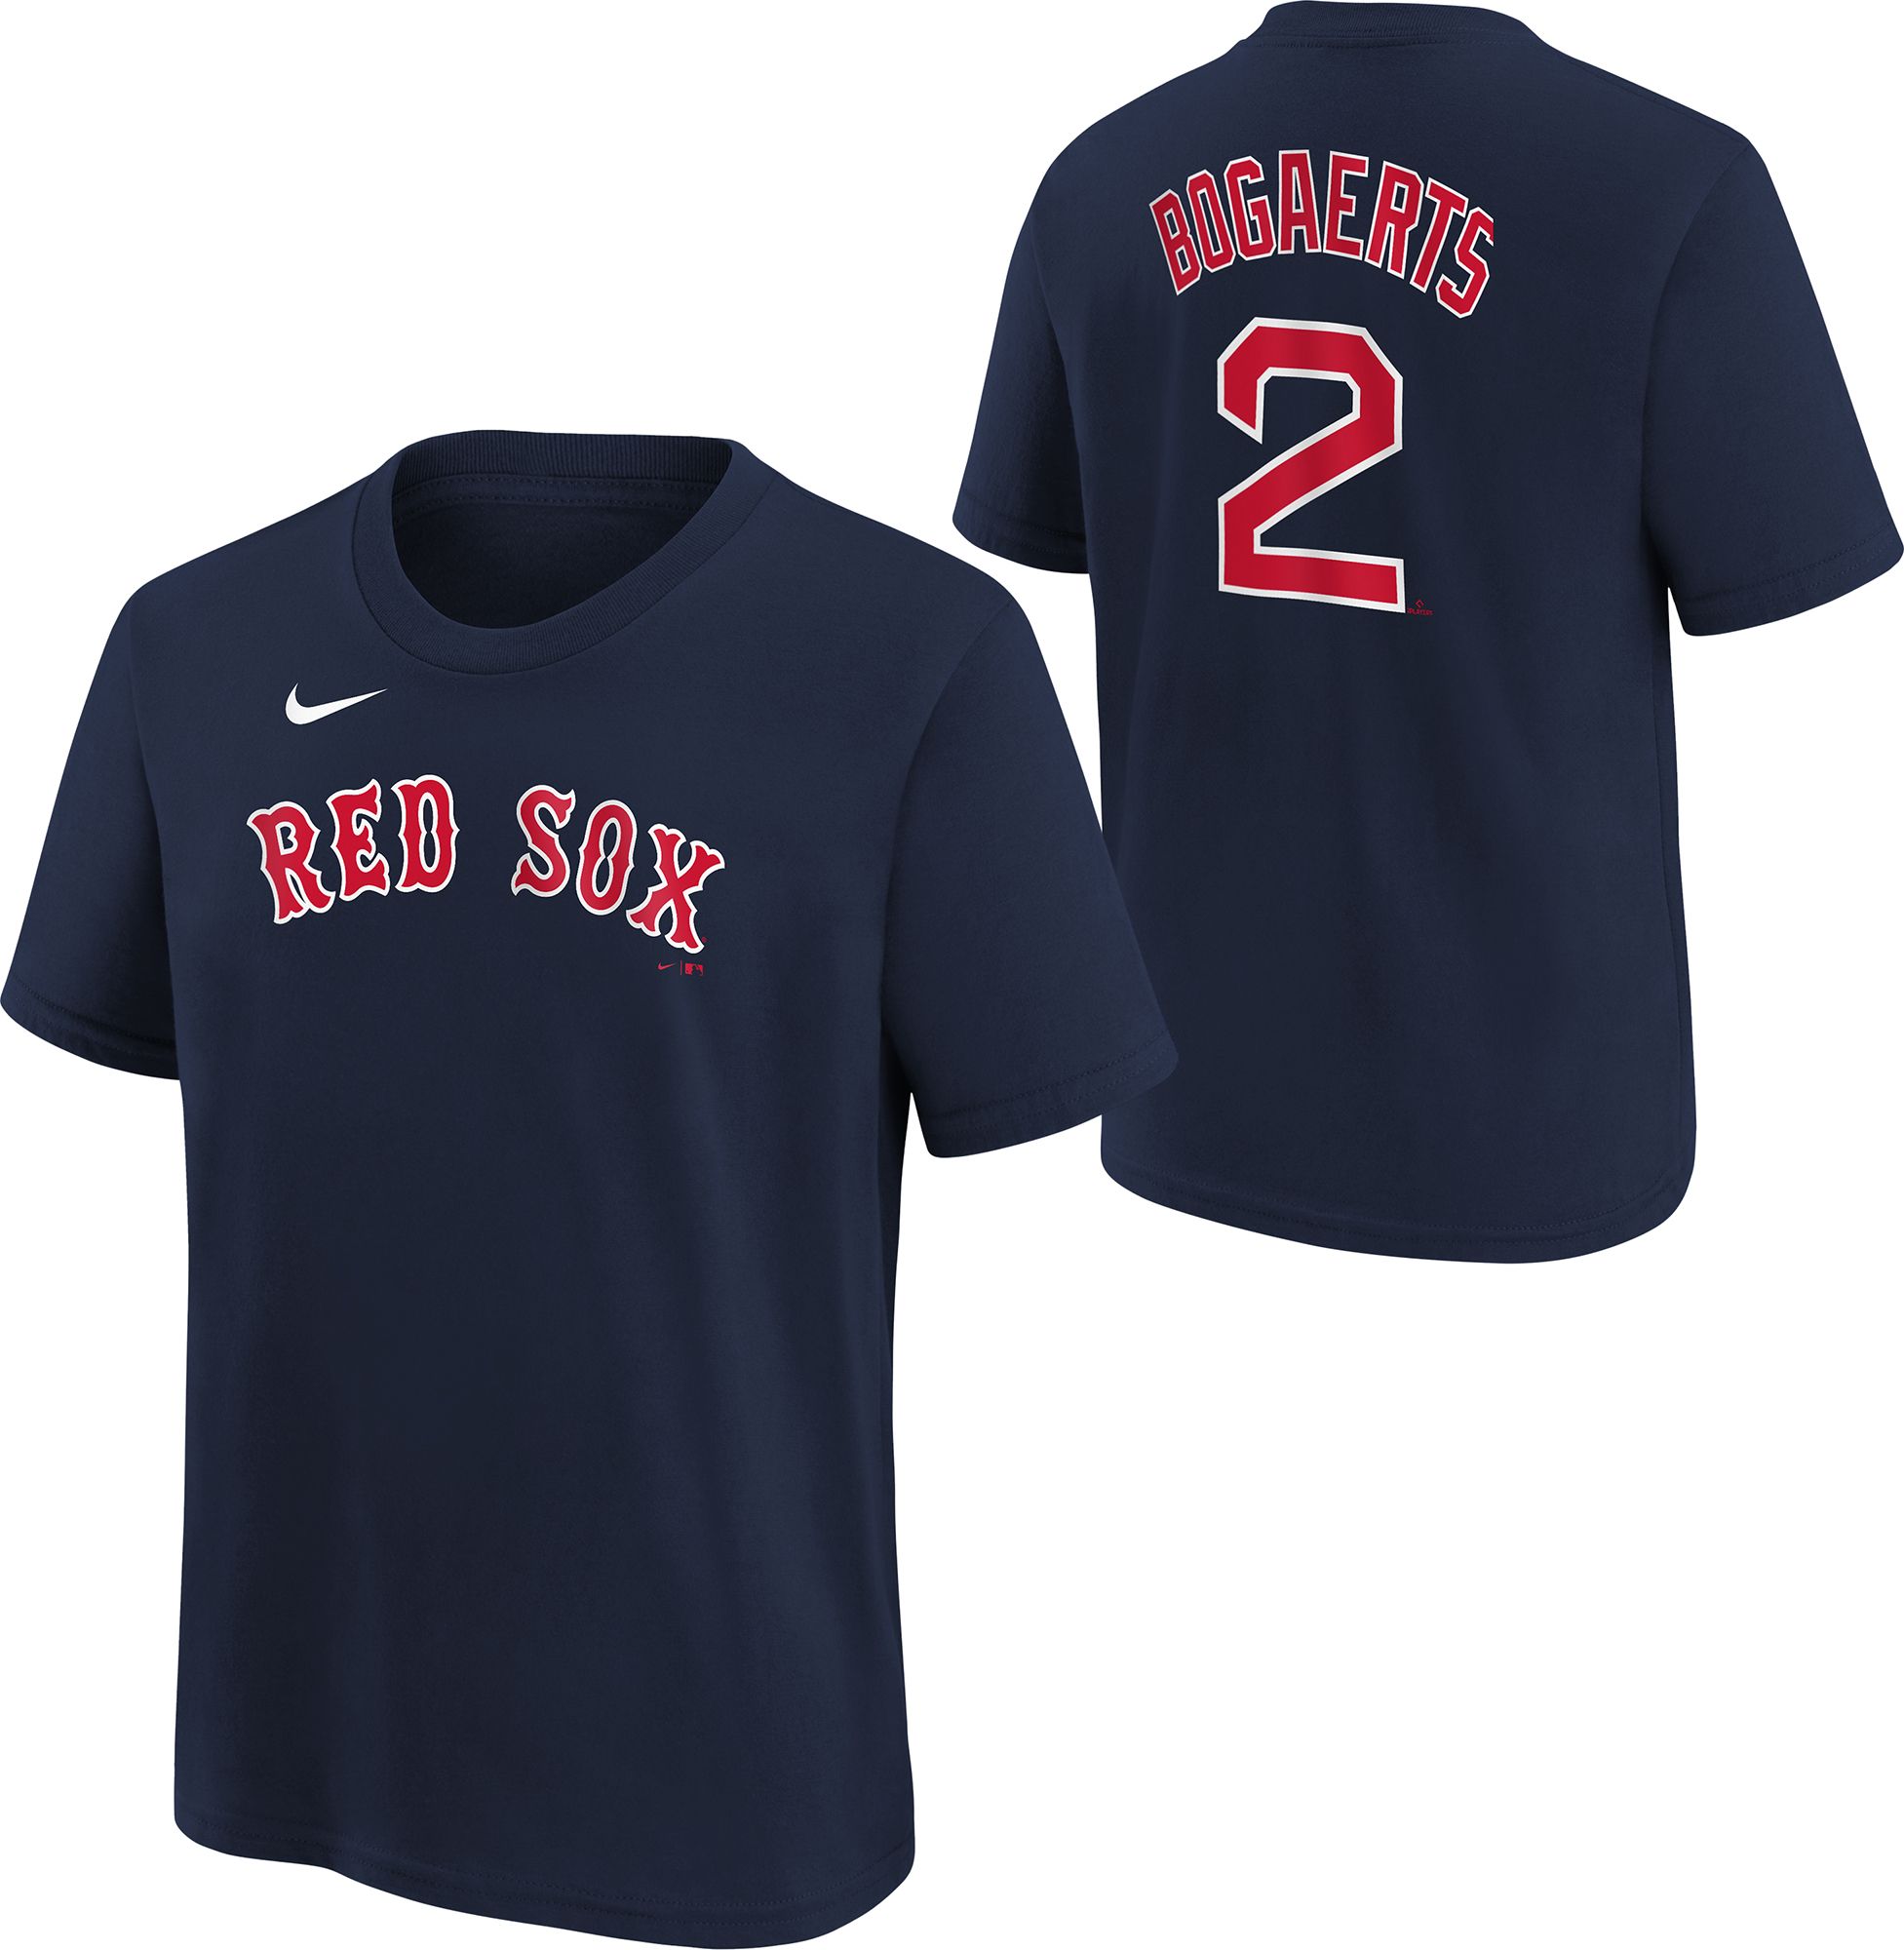 Nike Xander Bogaerts Youth Jersey - Redsox Kids Home Jersey